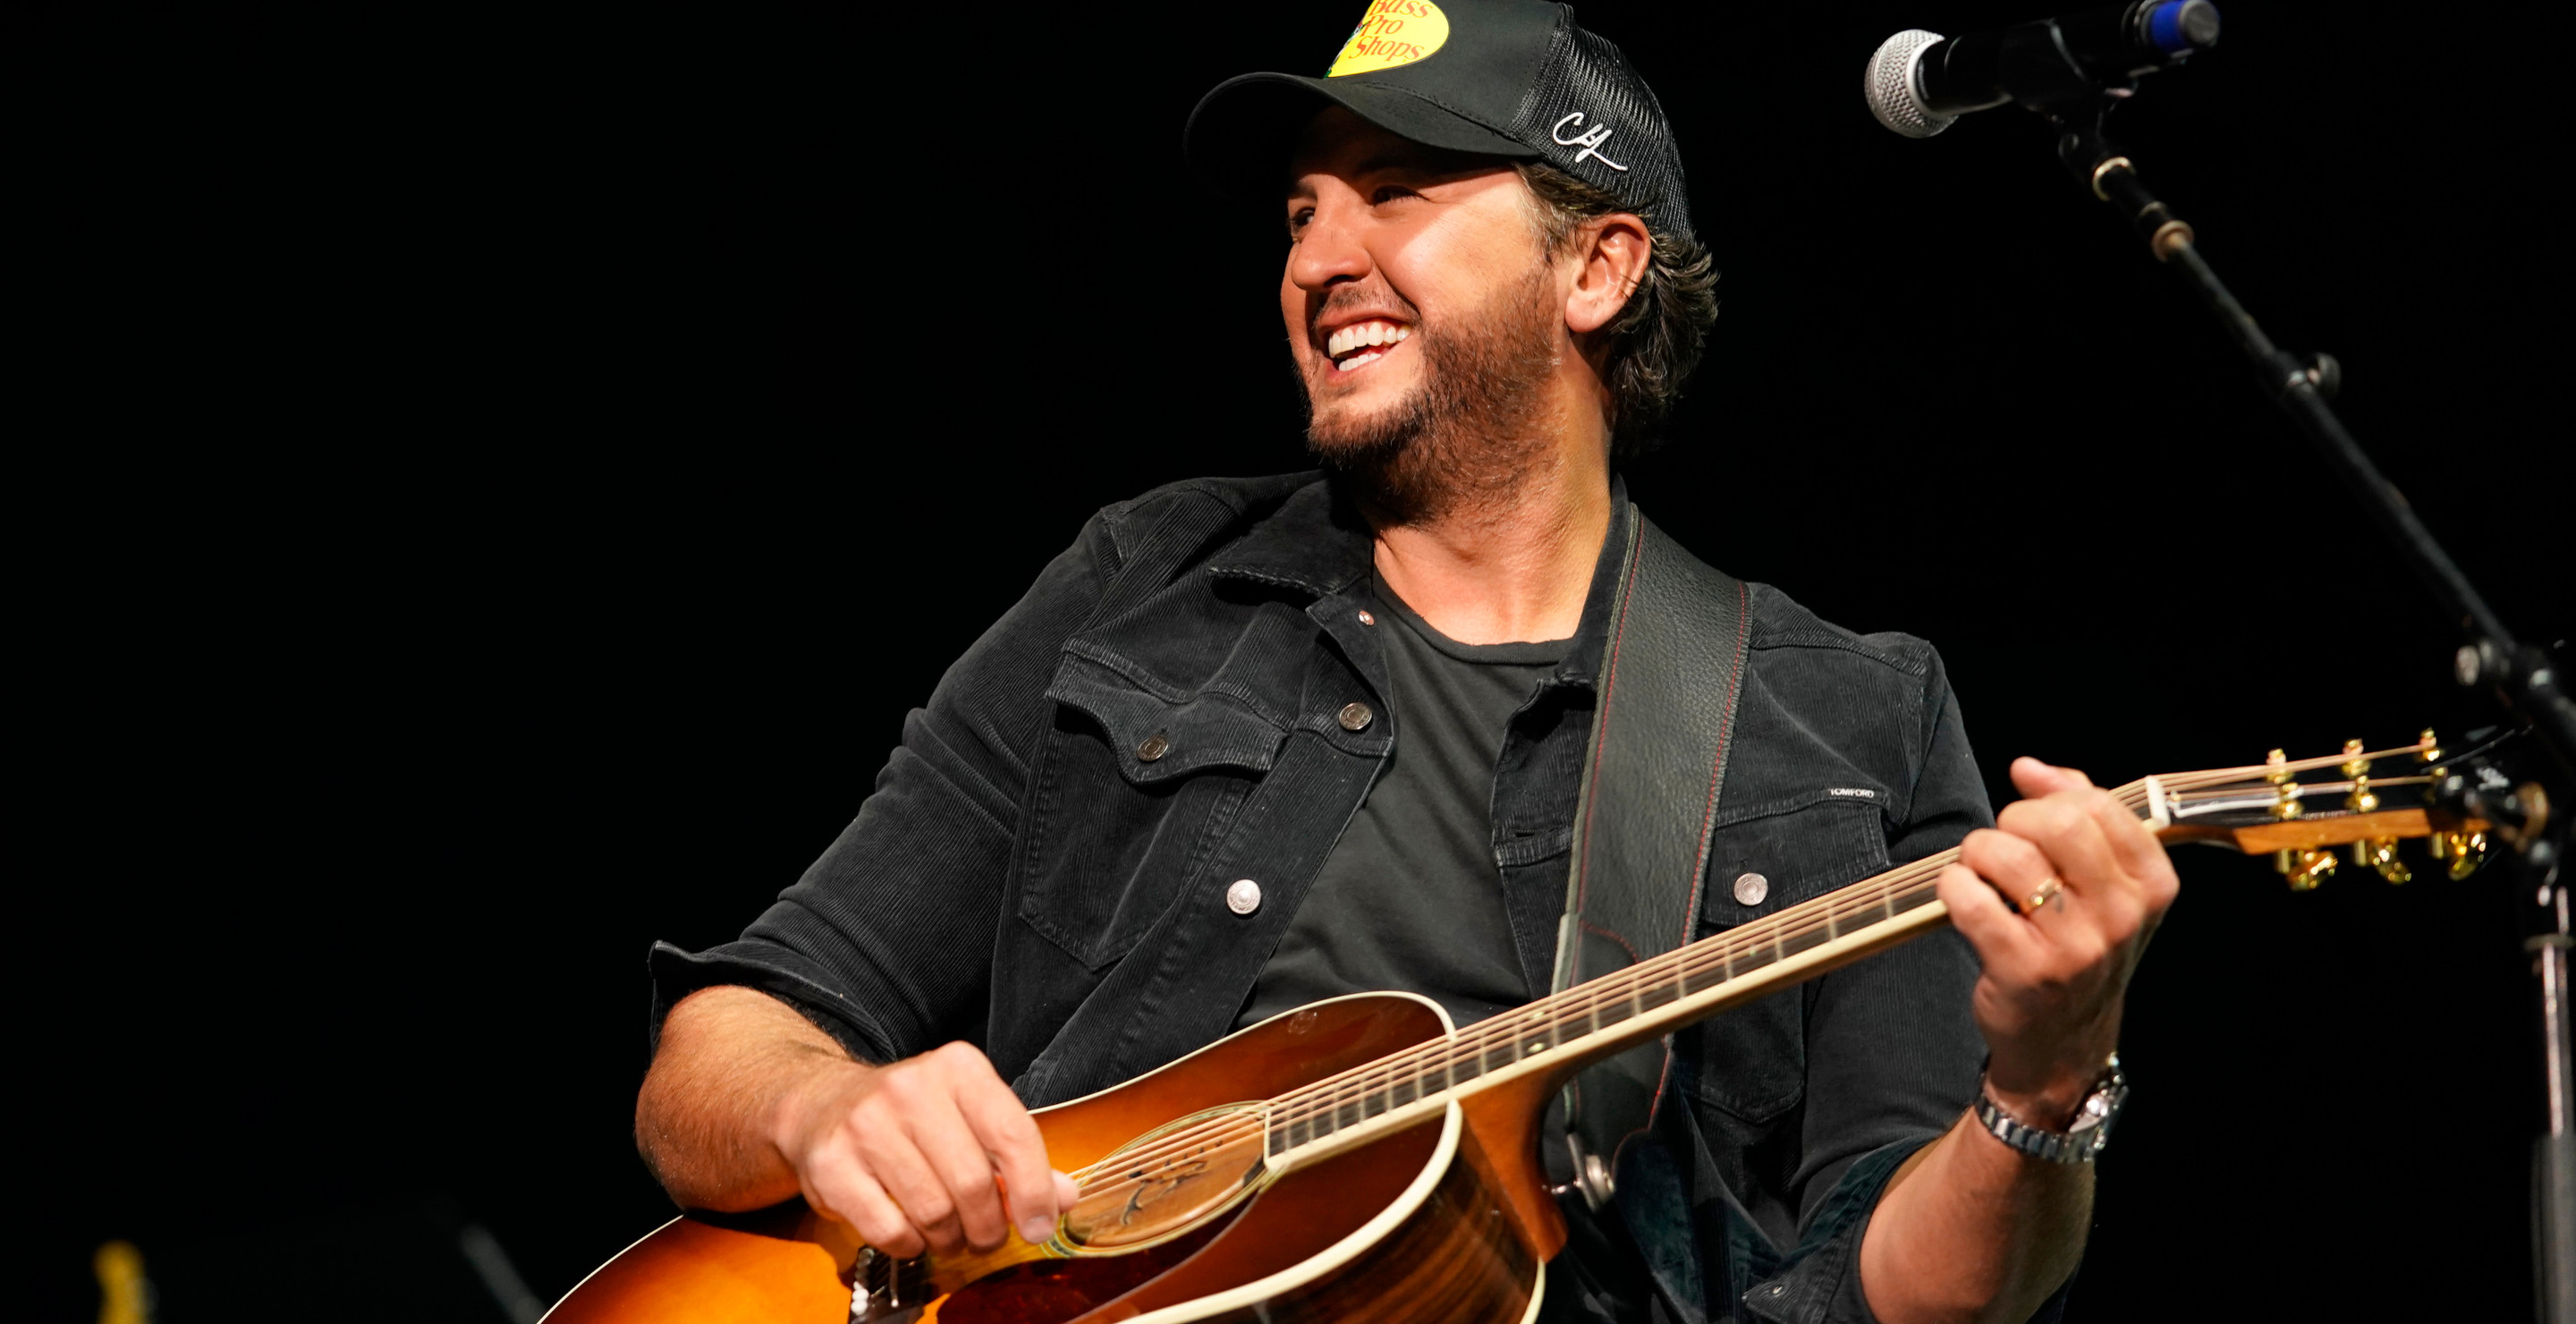 Luke Bryan and His Wife Opened Their Hearts and Home To His Two Nieces And Nephew